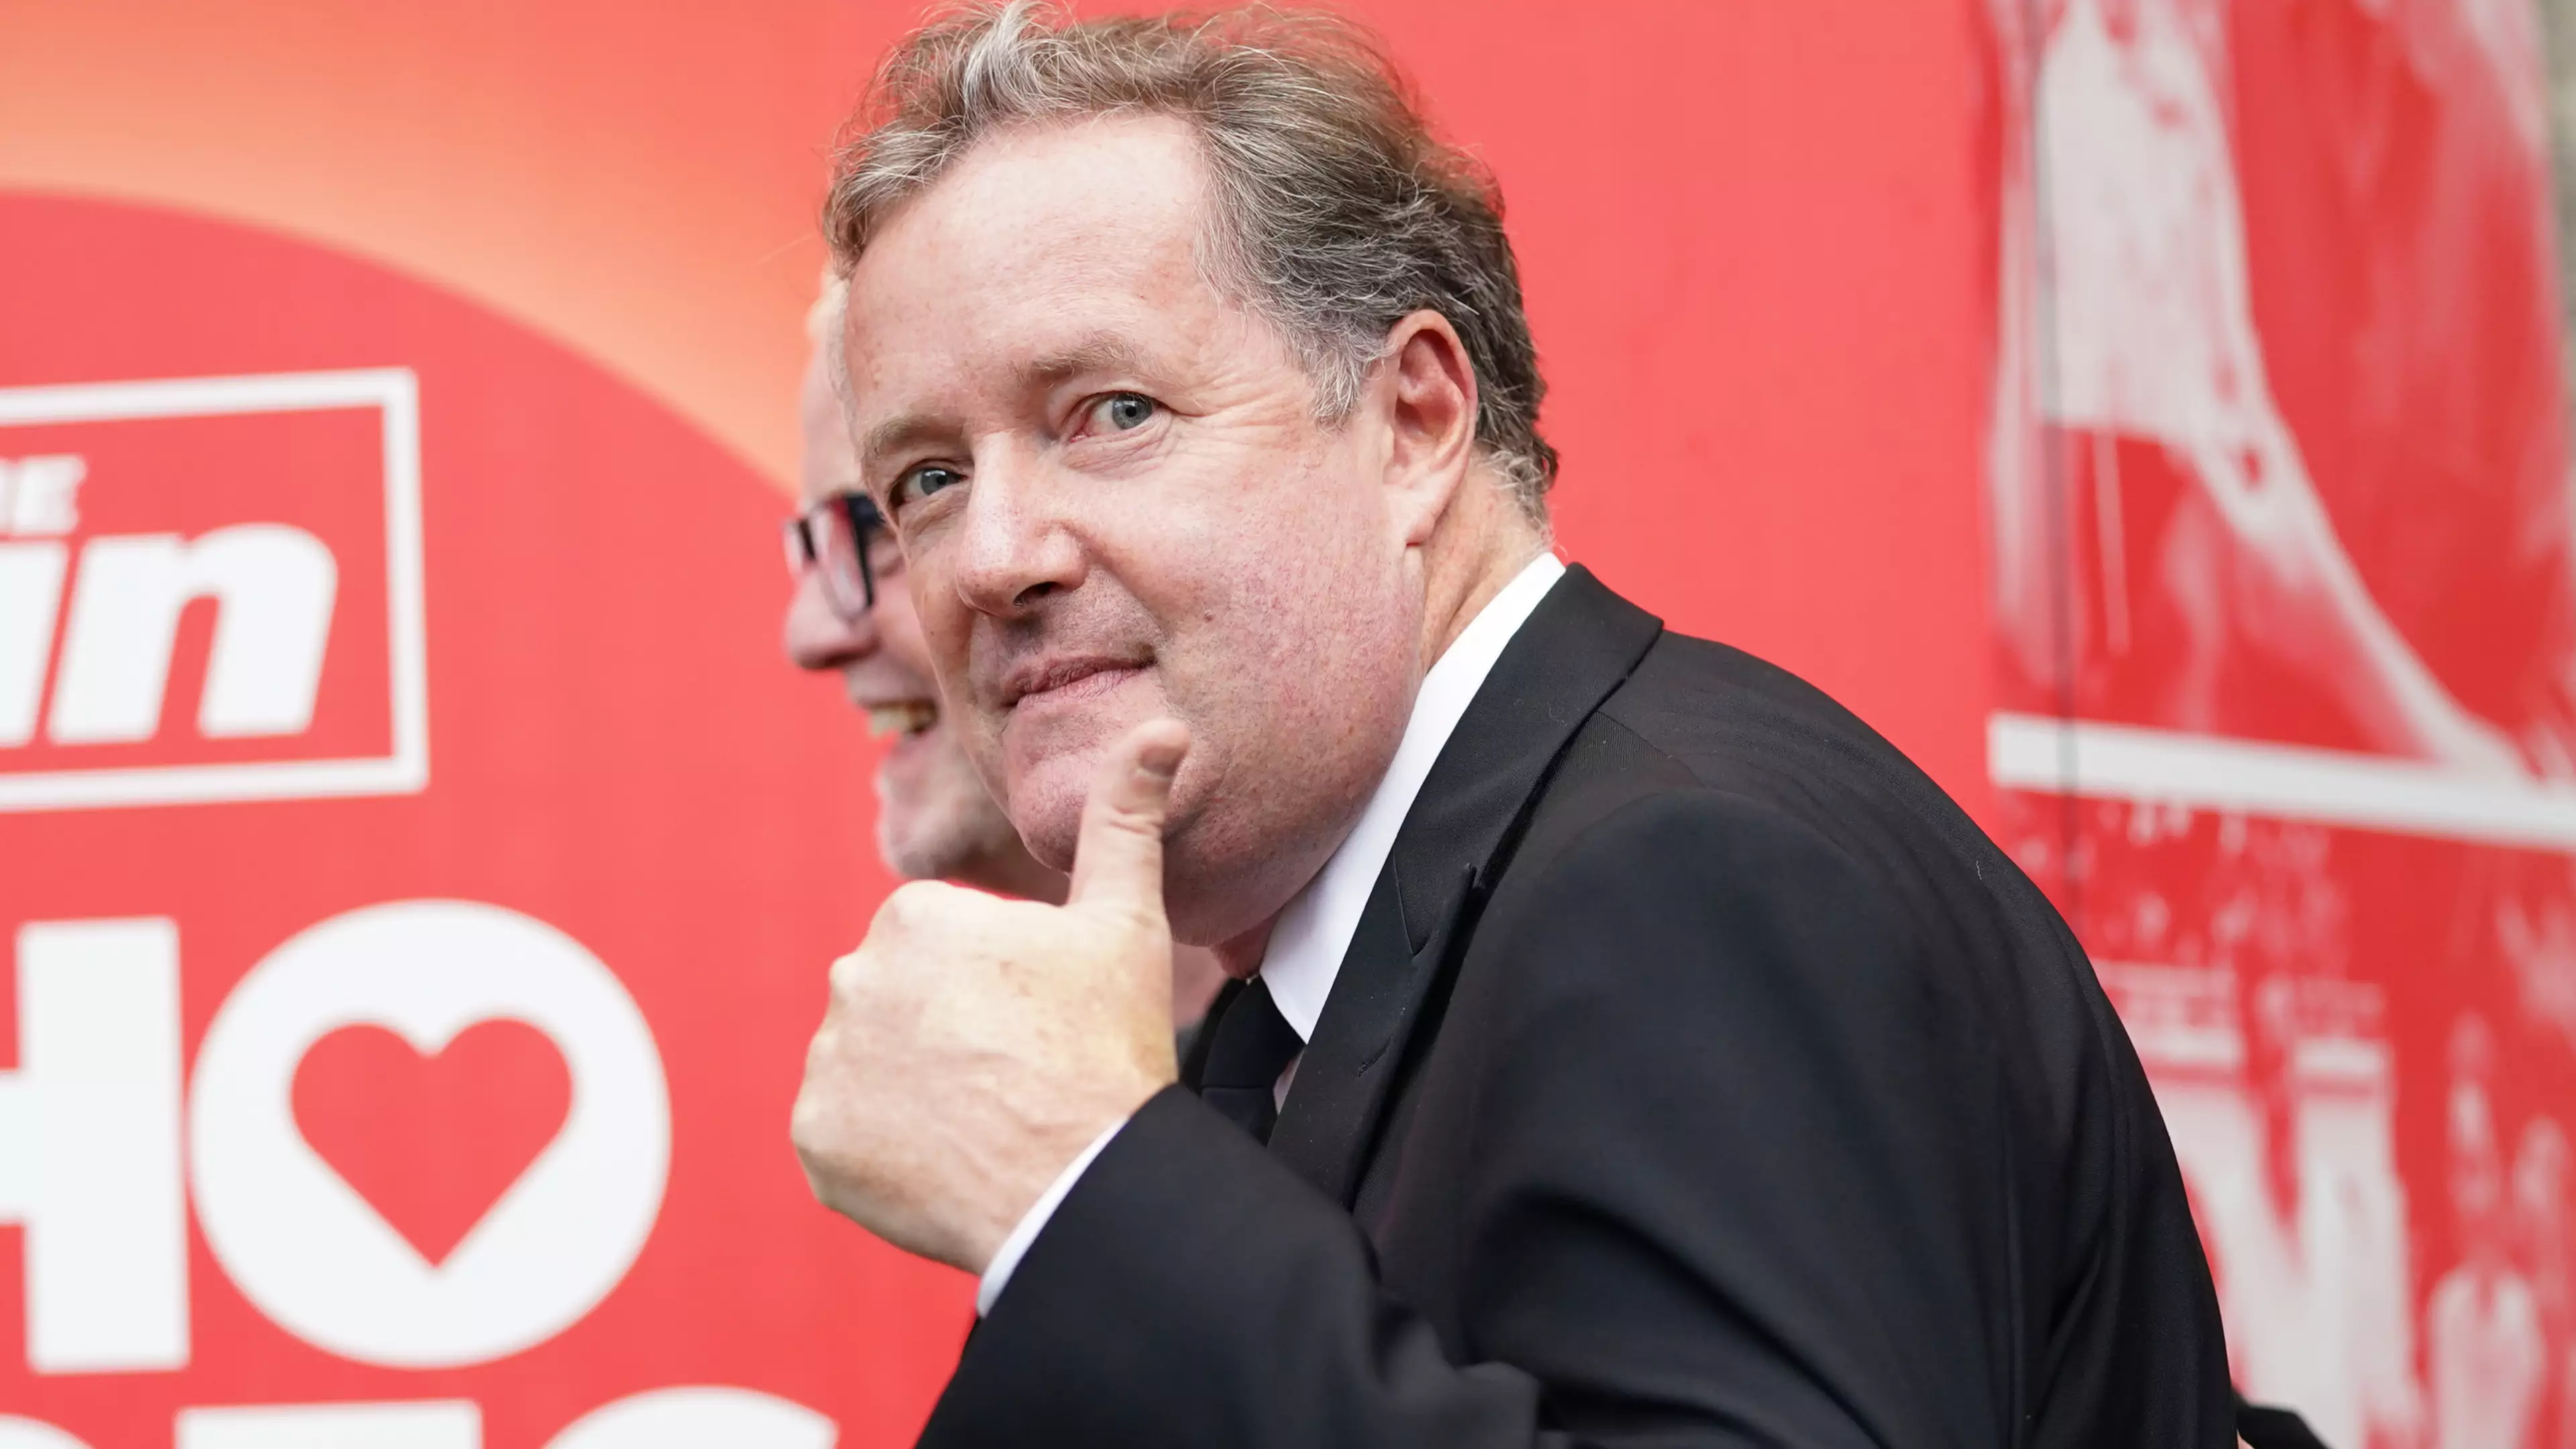 Everything You Need To Know About Piers Morgan On TalkTV